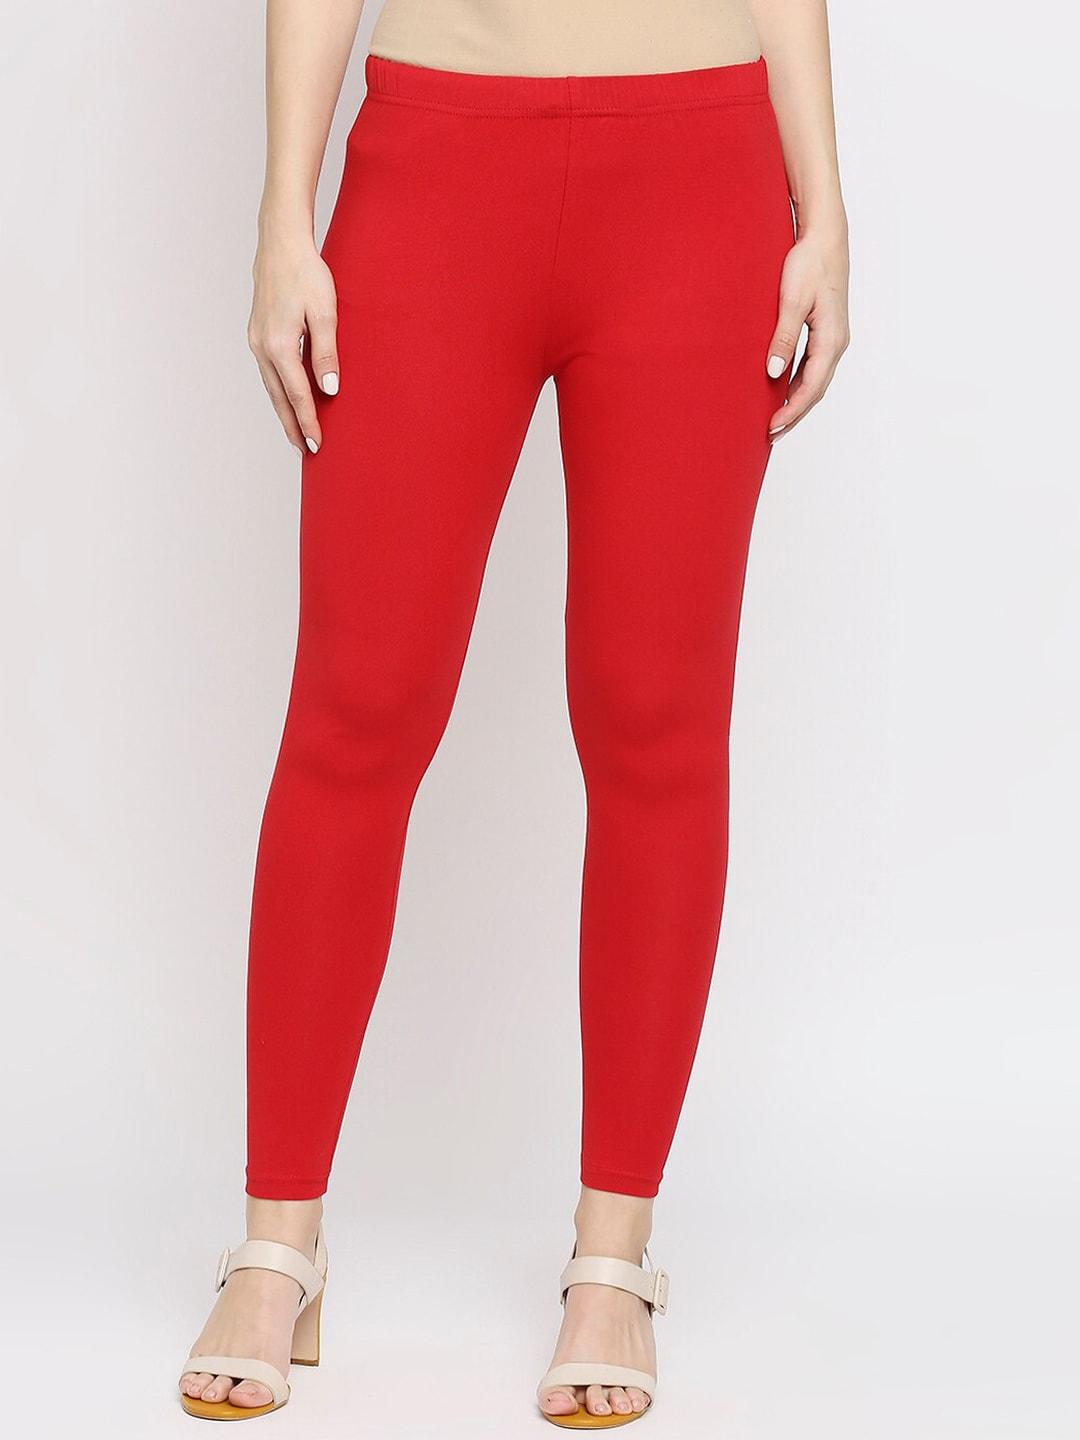 ethnicity-women-red-solid-ankle-length-leggings